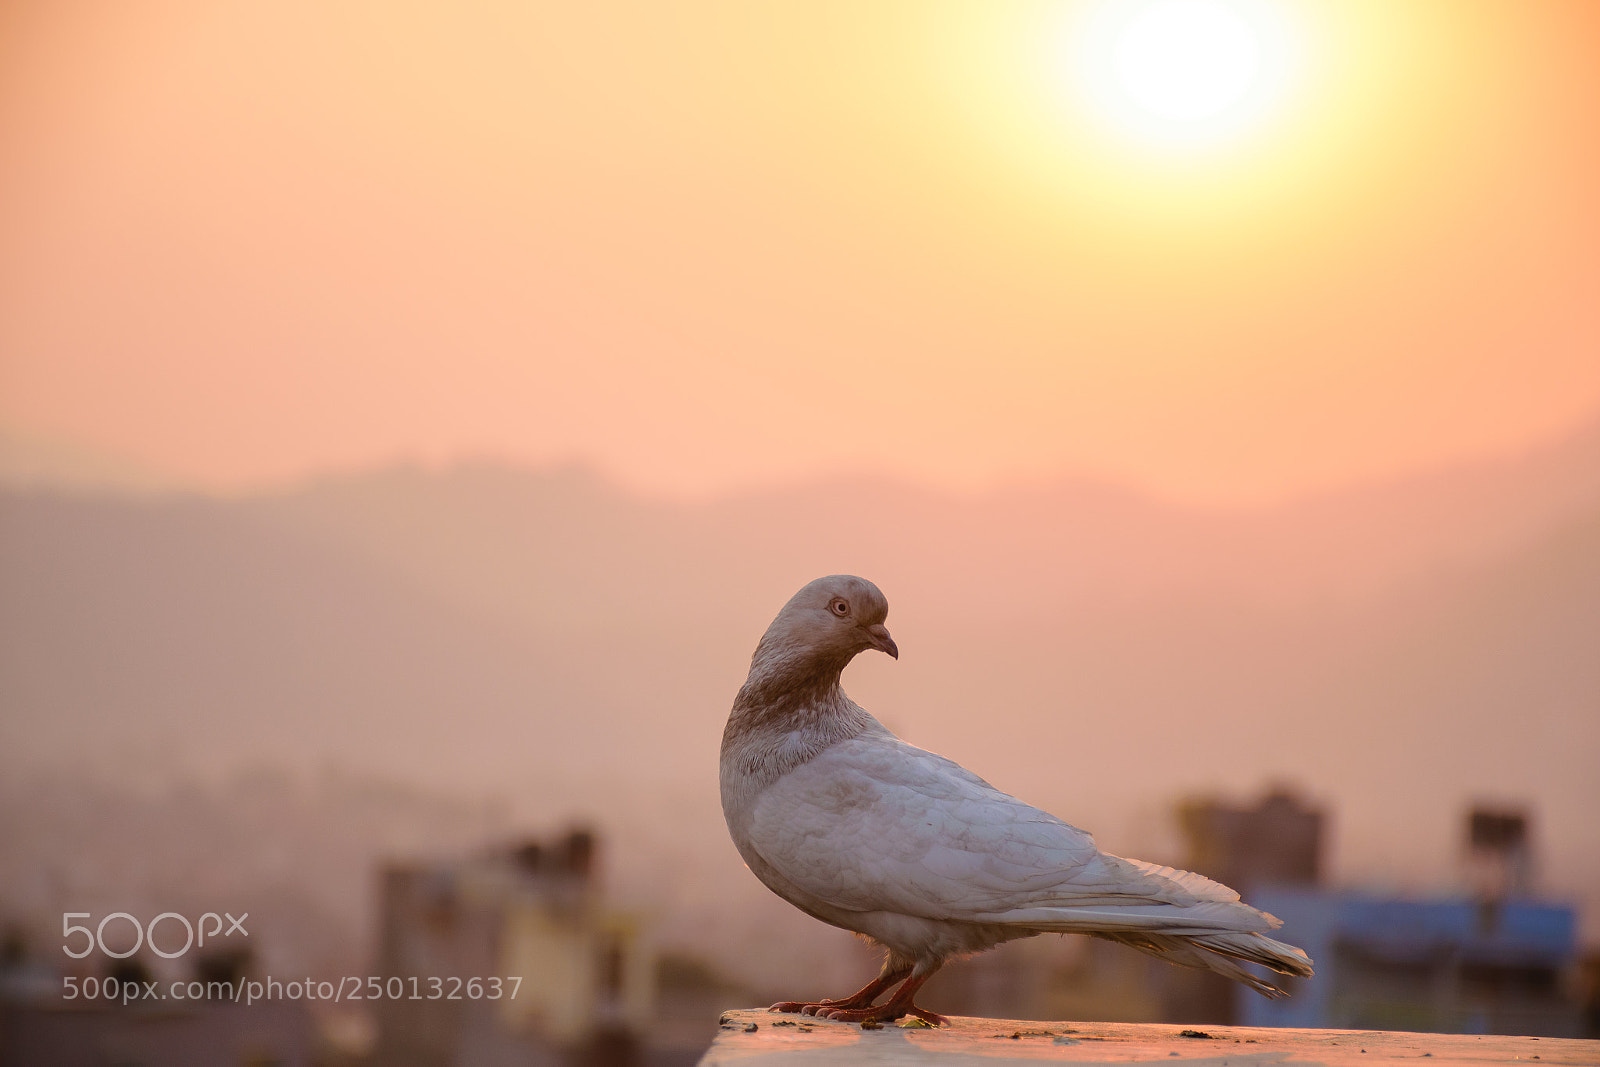 Nikon D5300 sample photo. White pigeon amidst the photography